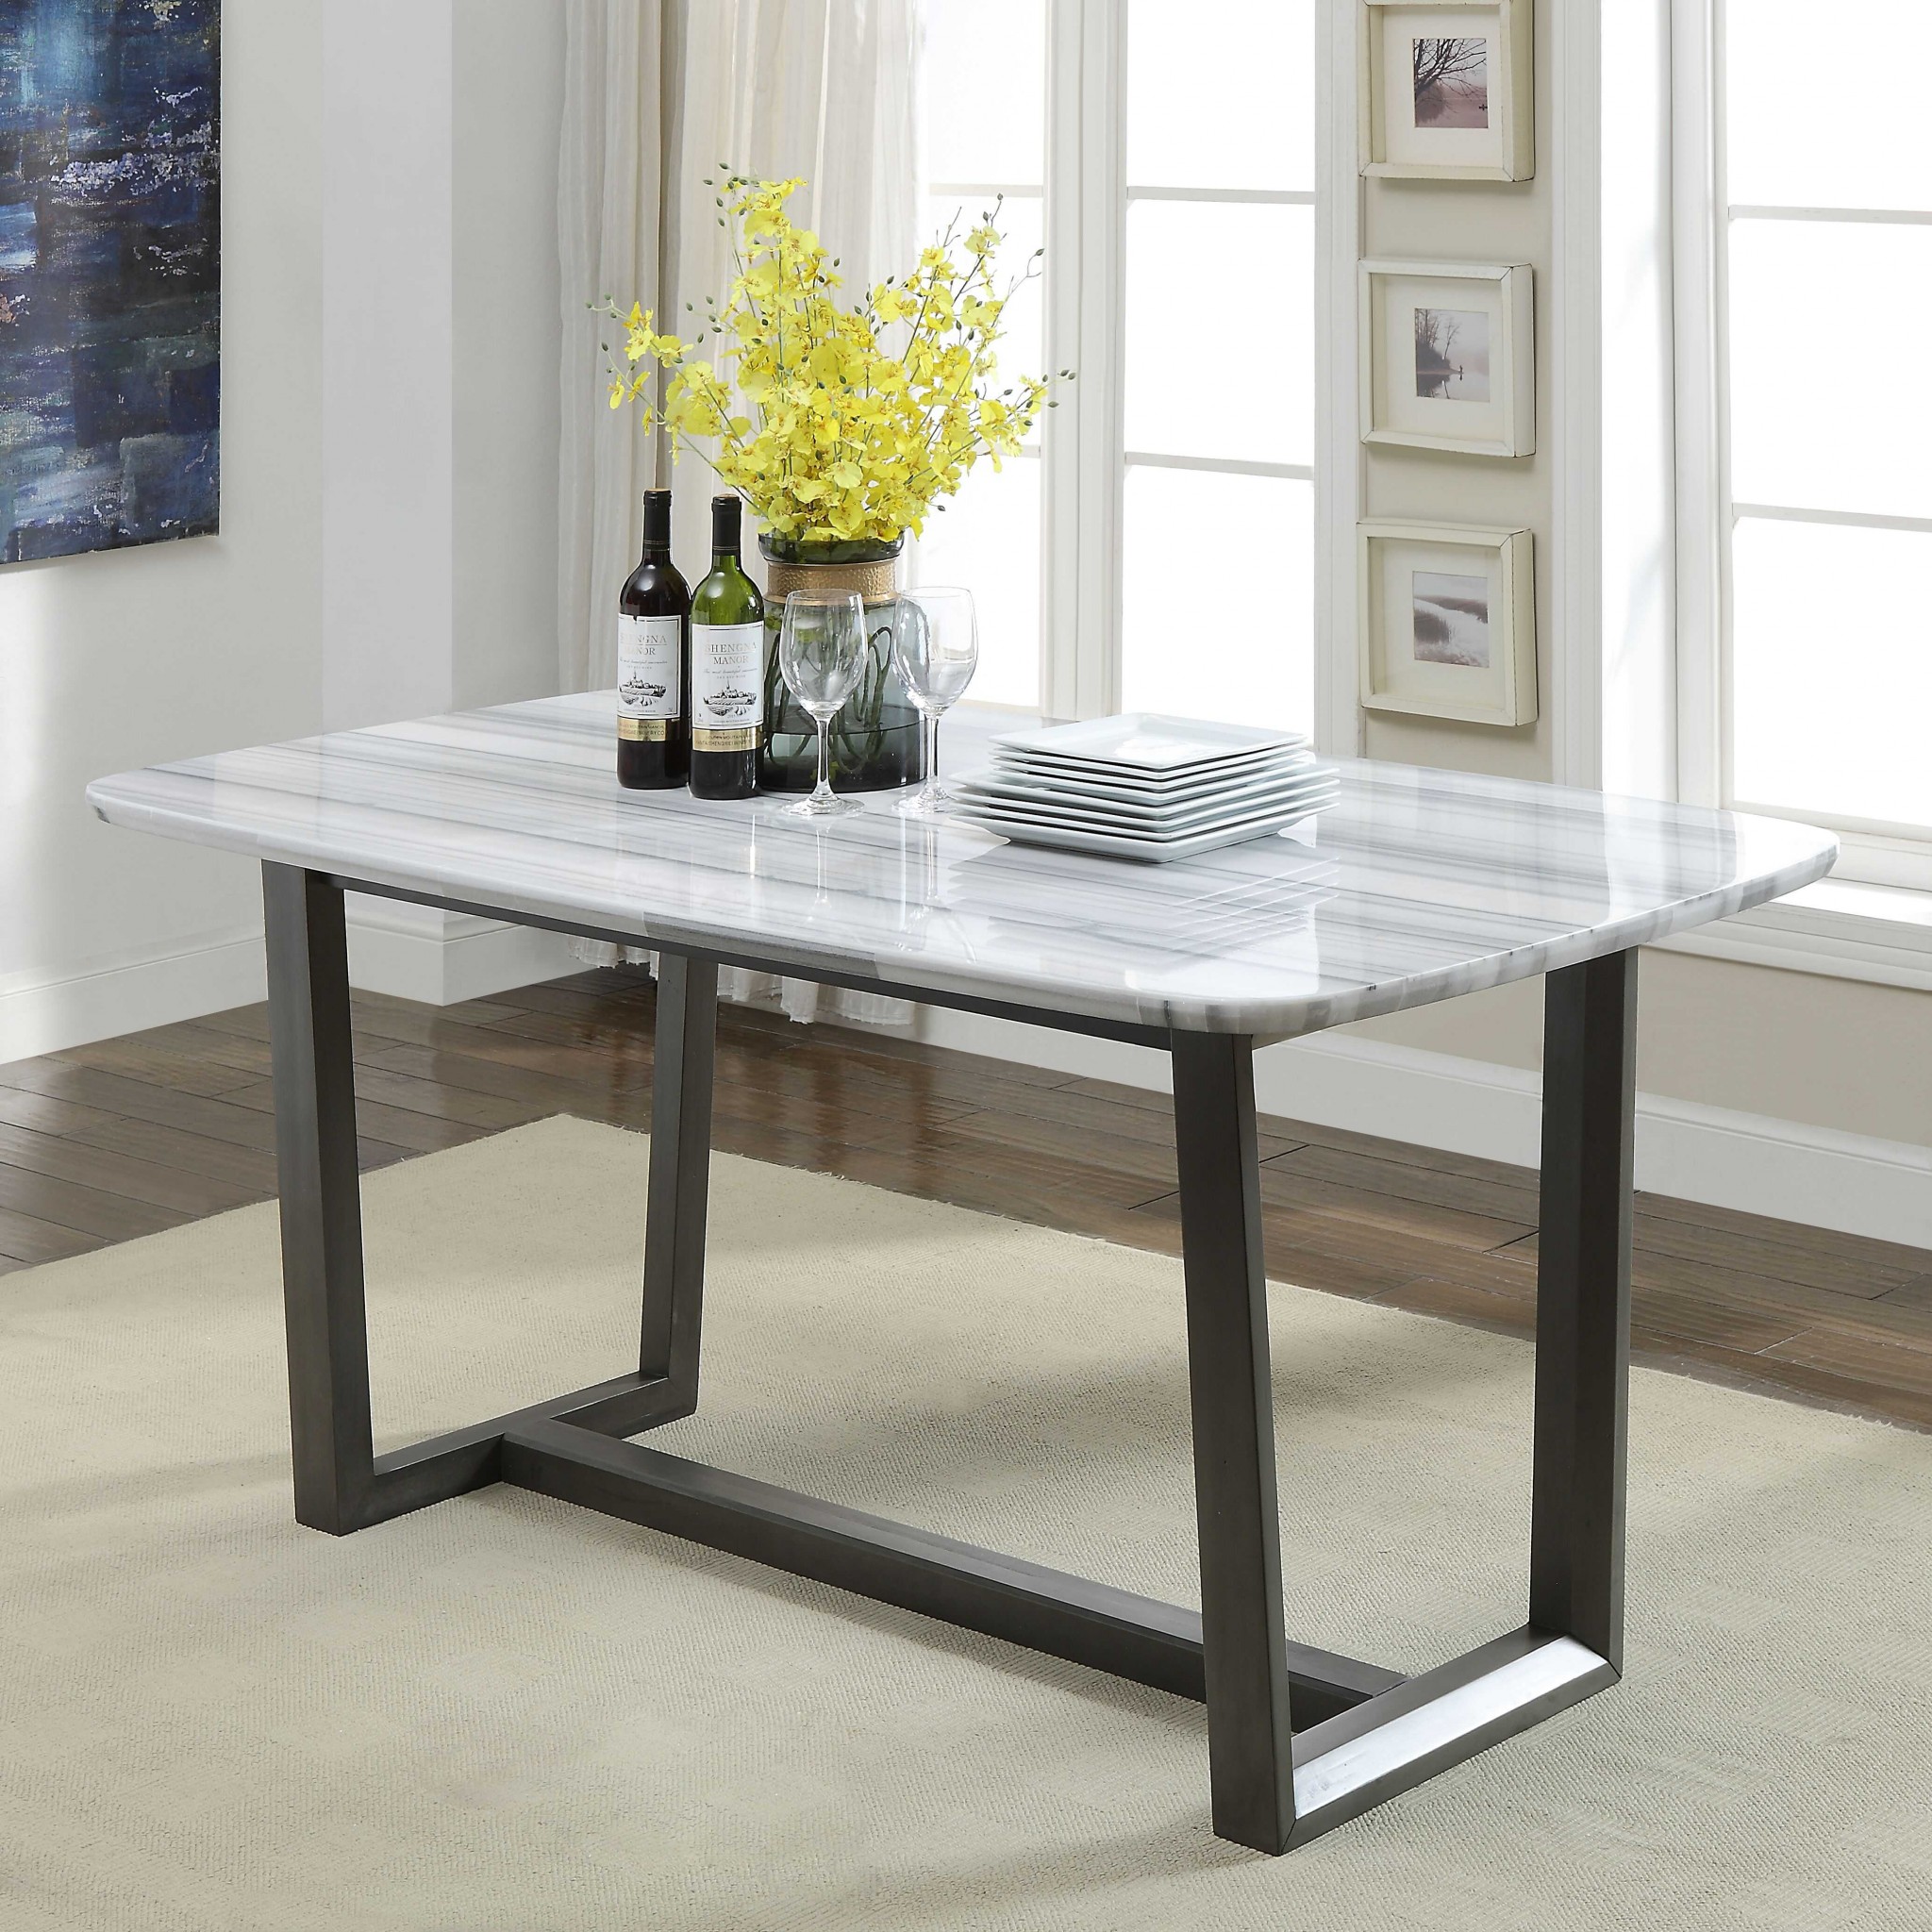 40" X 72" X 30" Marble Gray Oak Wood Marble Dining Table